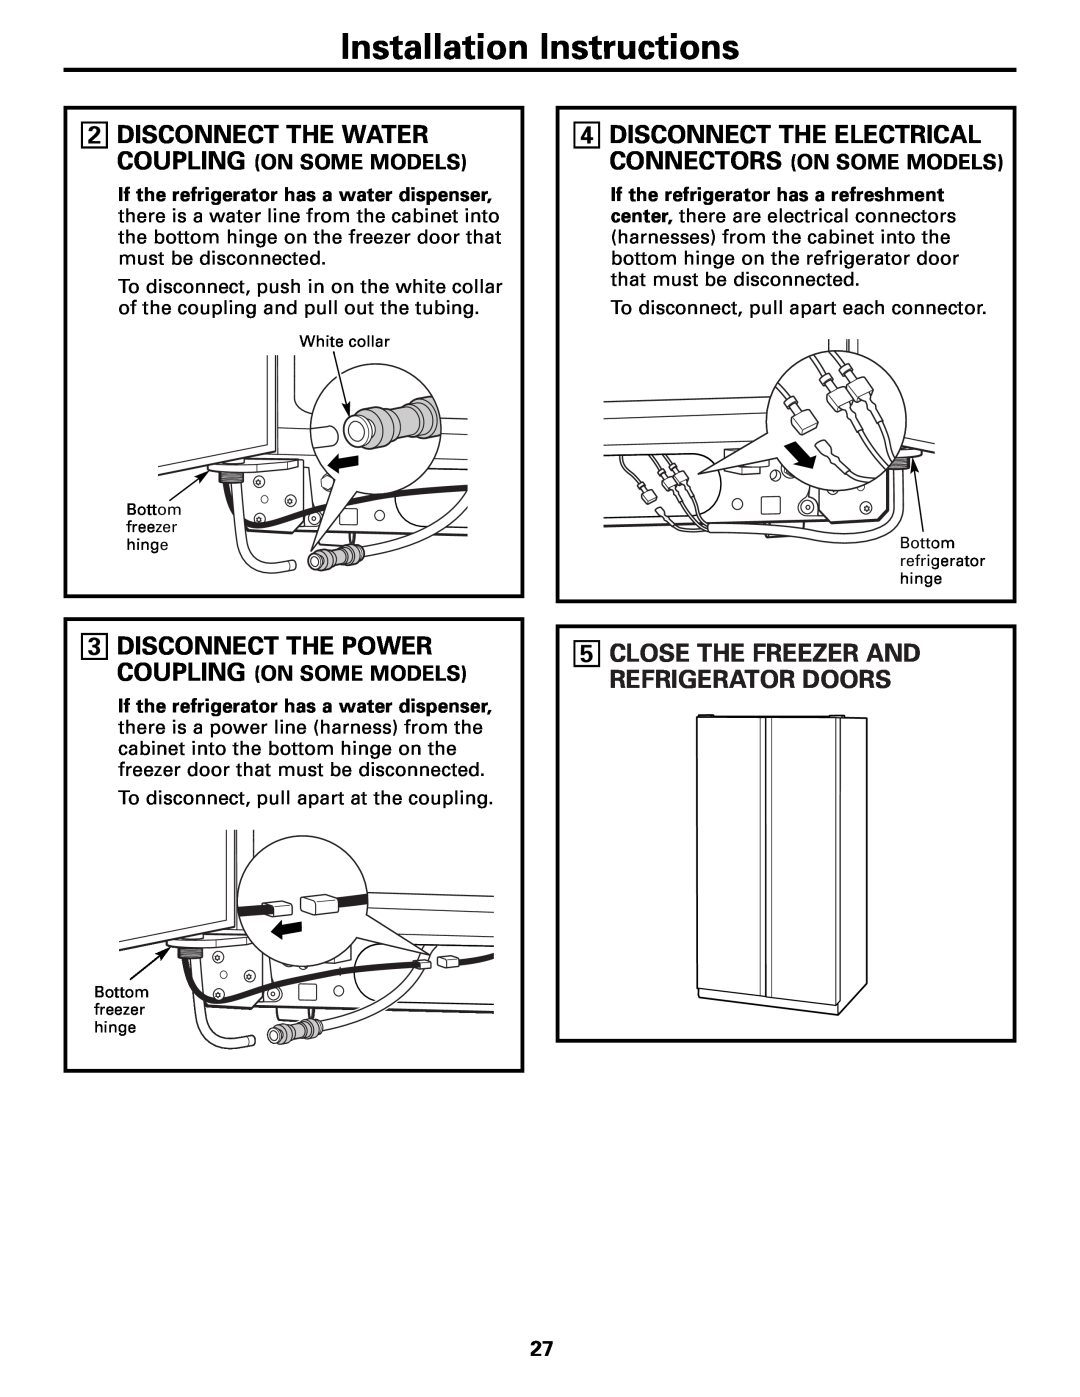 Hotpoint 23 operating instructions Close The Freezer And Refrigerator Doors, Disconnect The Water Coupling On Some Models 